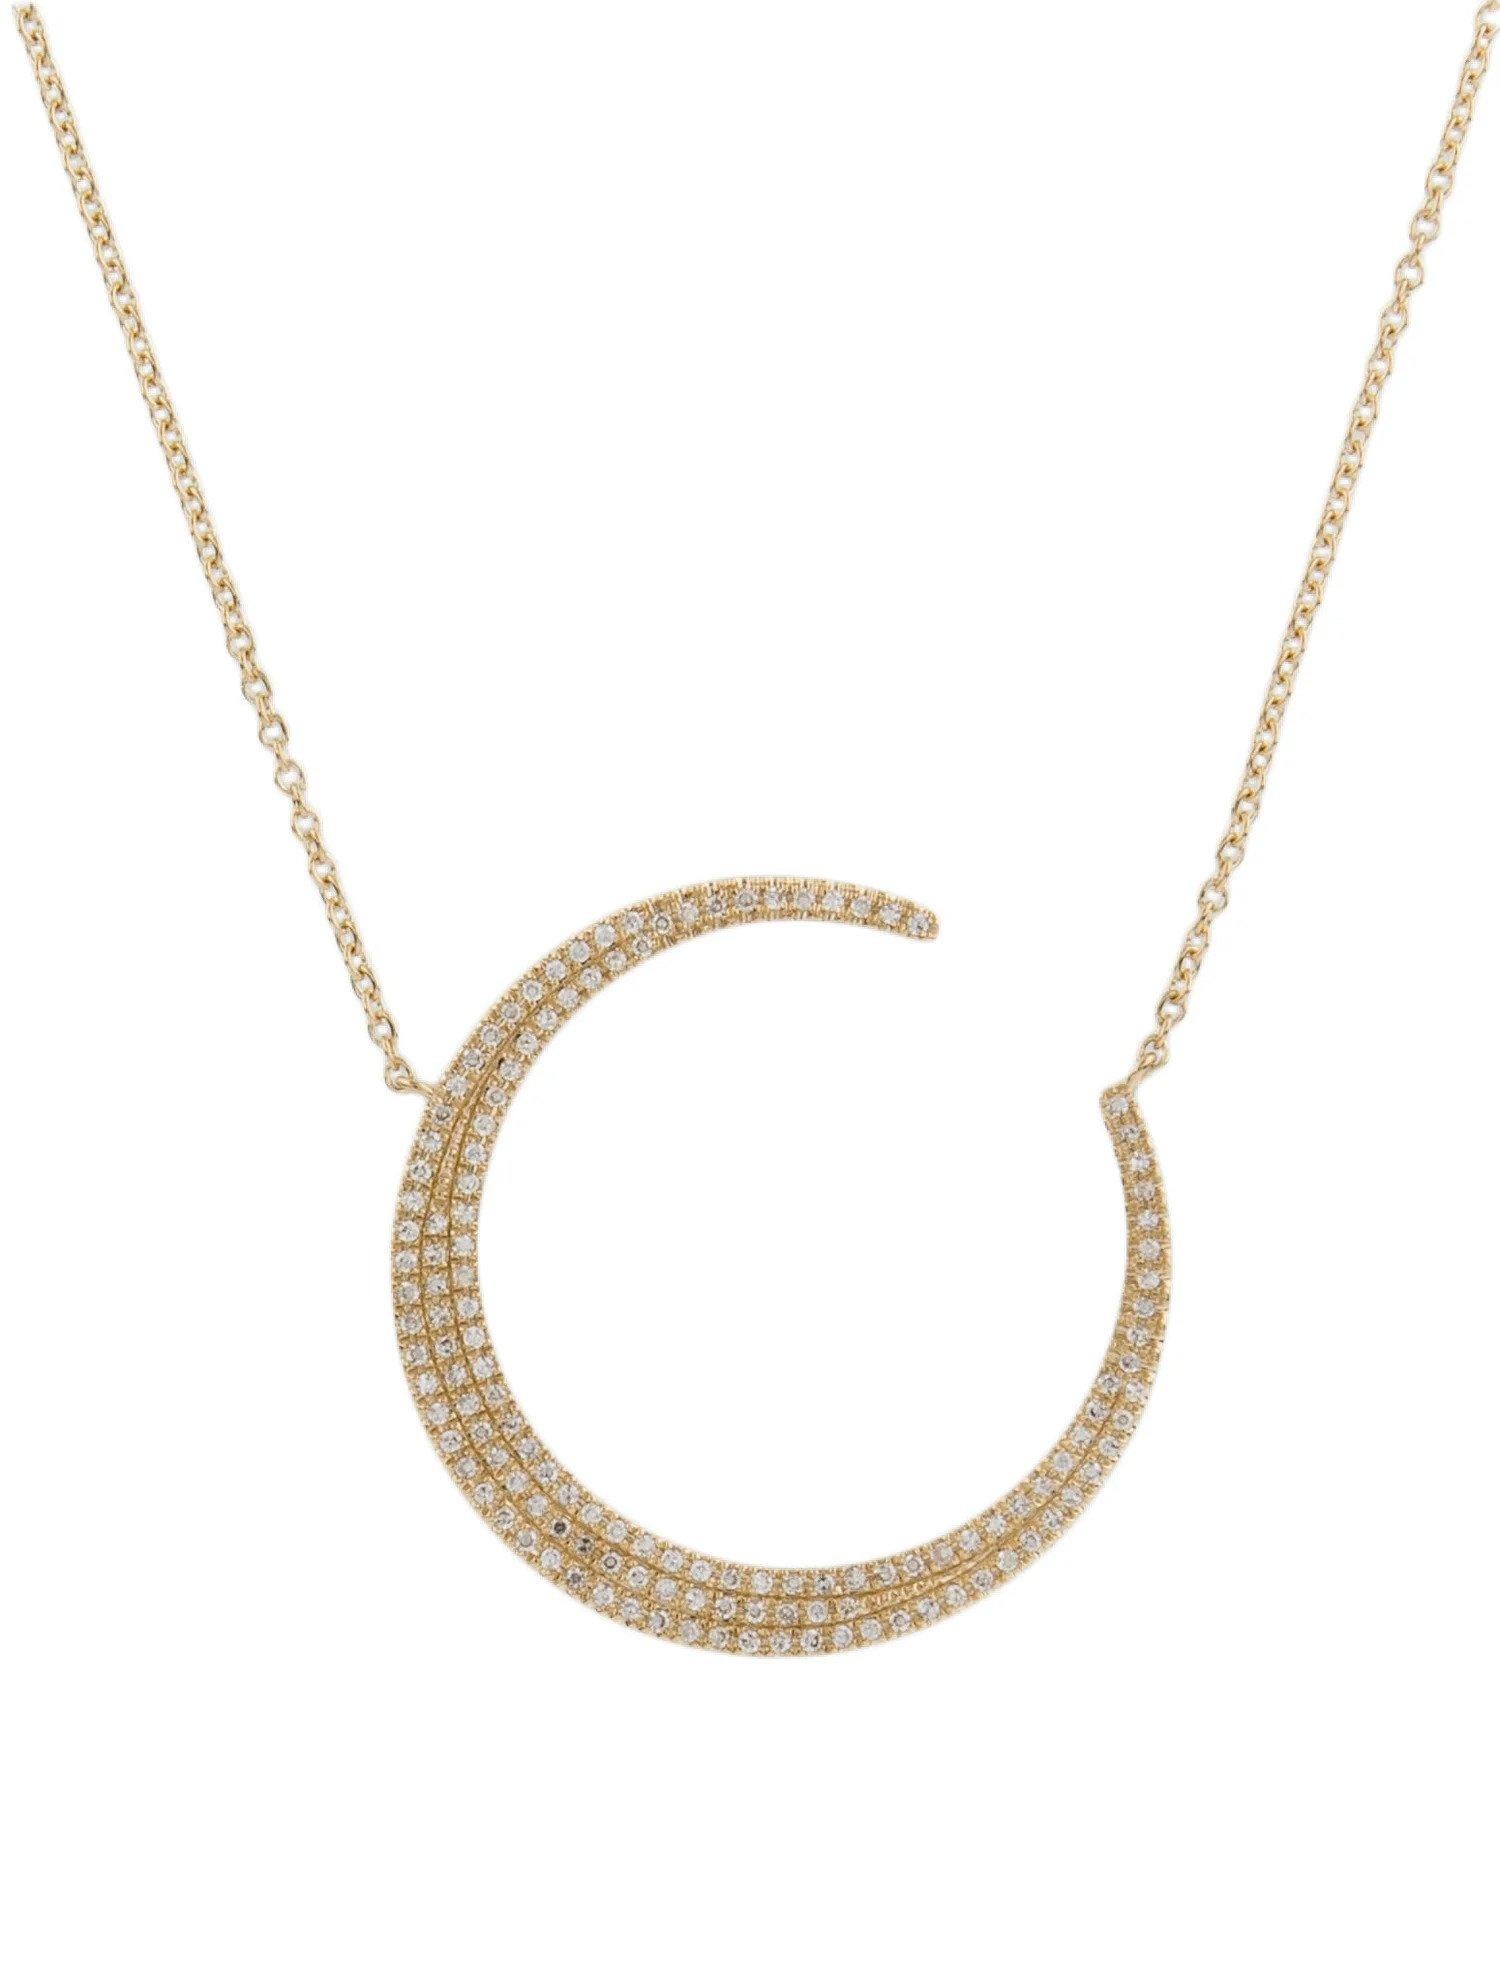 0.37 Carat Diamond Crescent Moon Yellow Gold Pendant Necklace In New Condition For Sale In Great Neck, NY